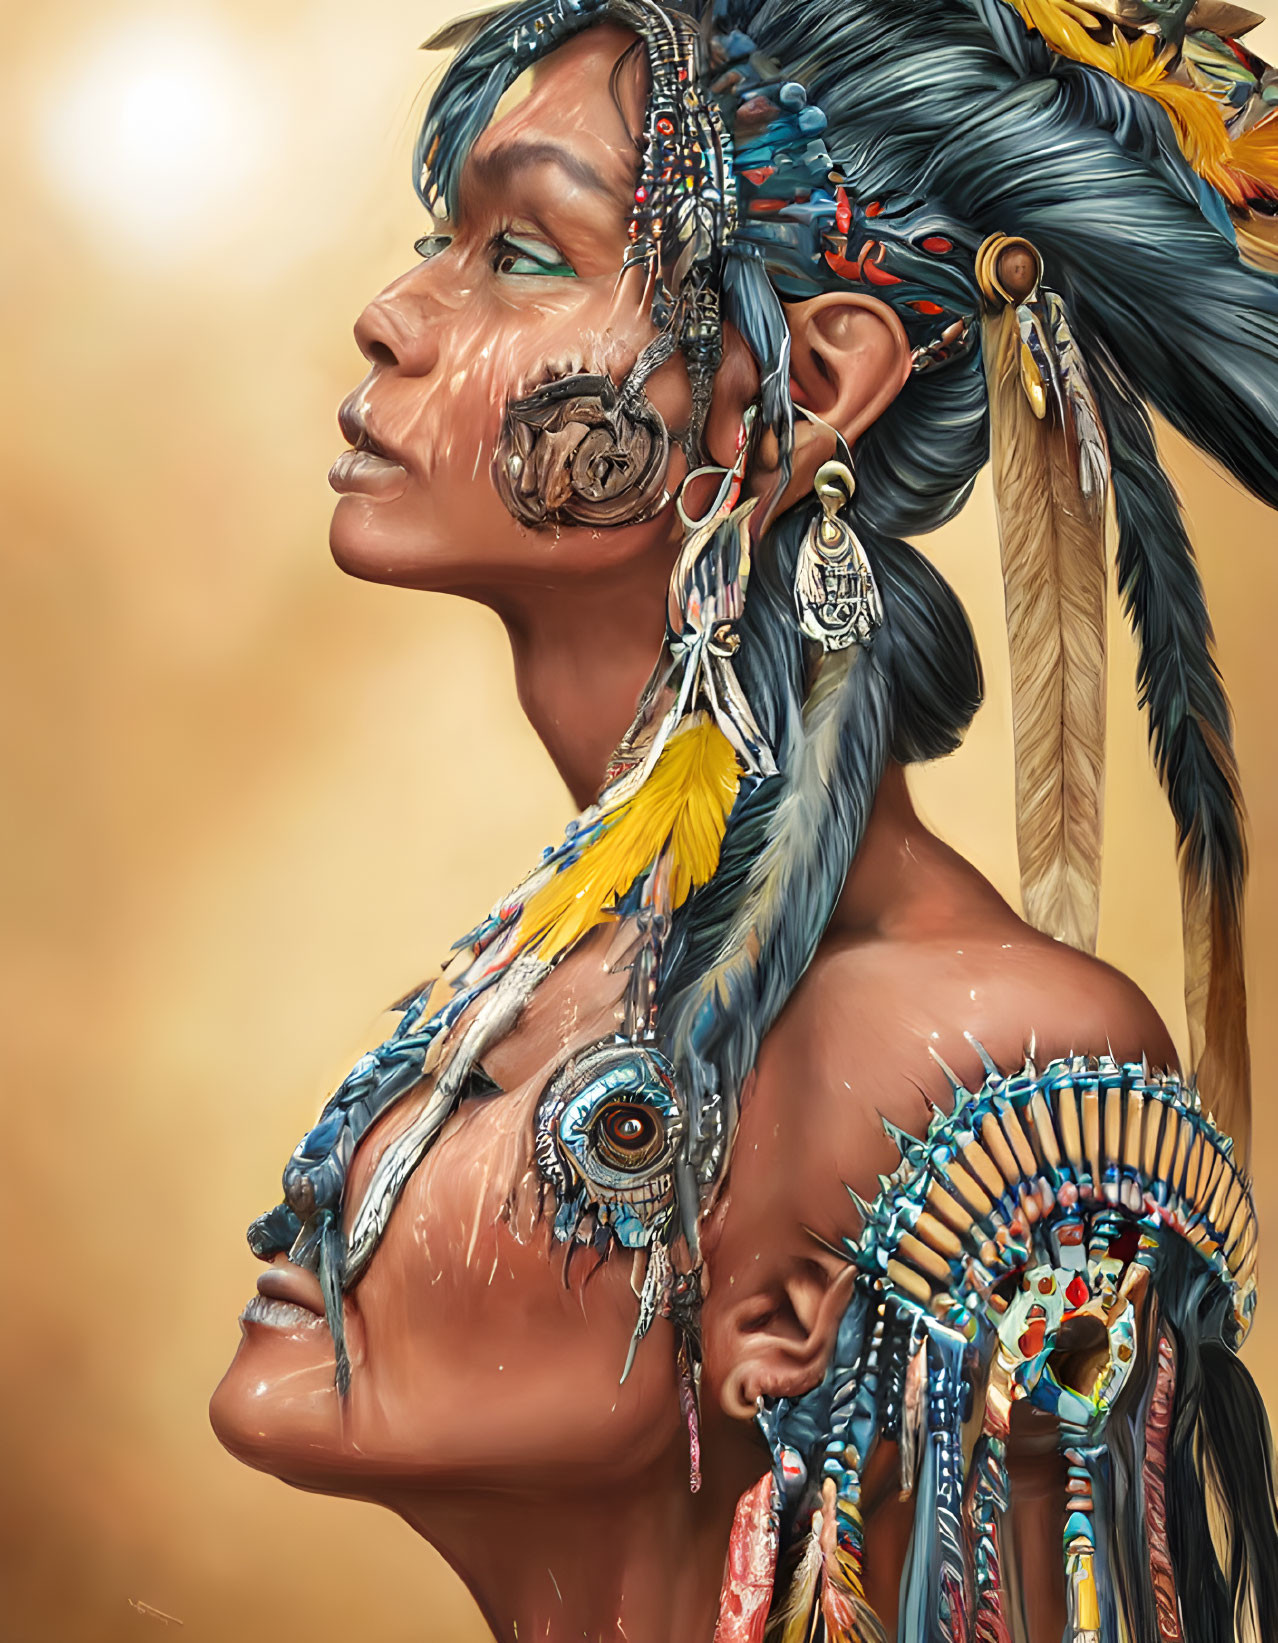 Portrait of a person with tribal face paint, feathers, beads, and dreamcatcher earring